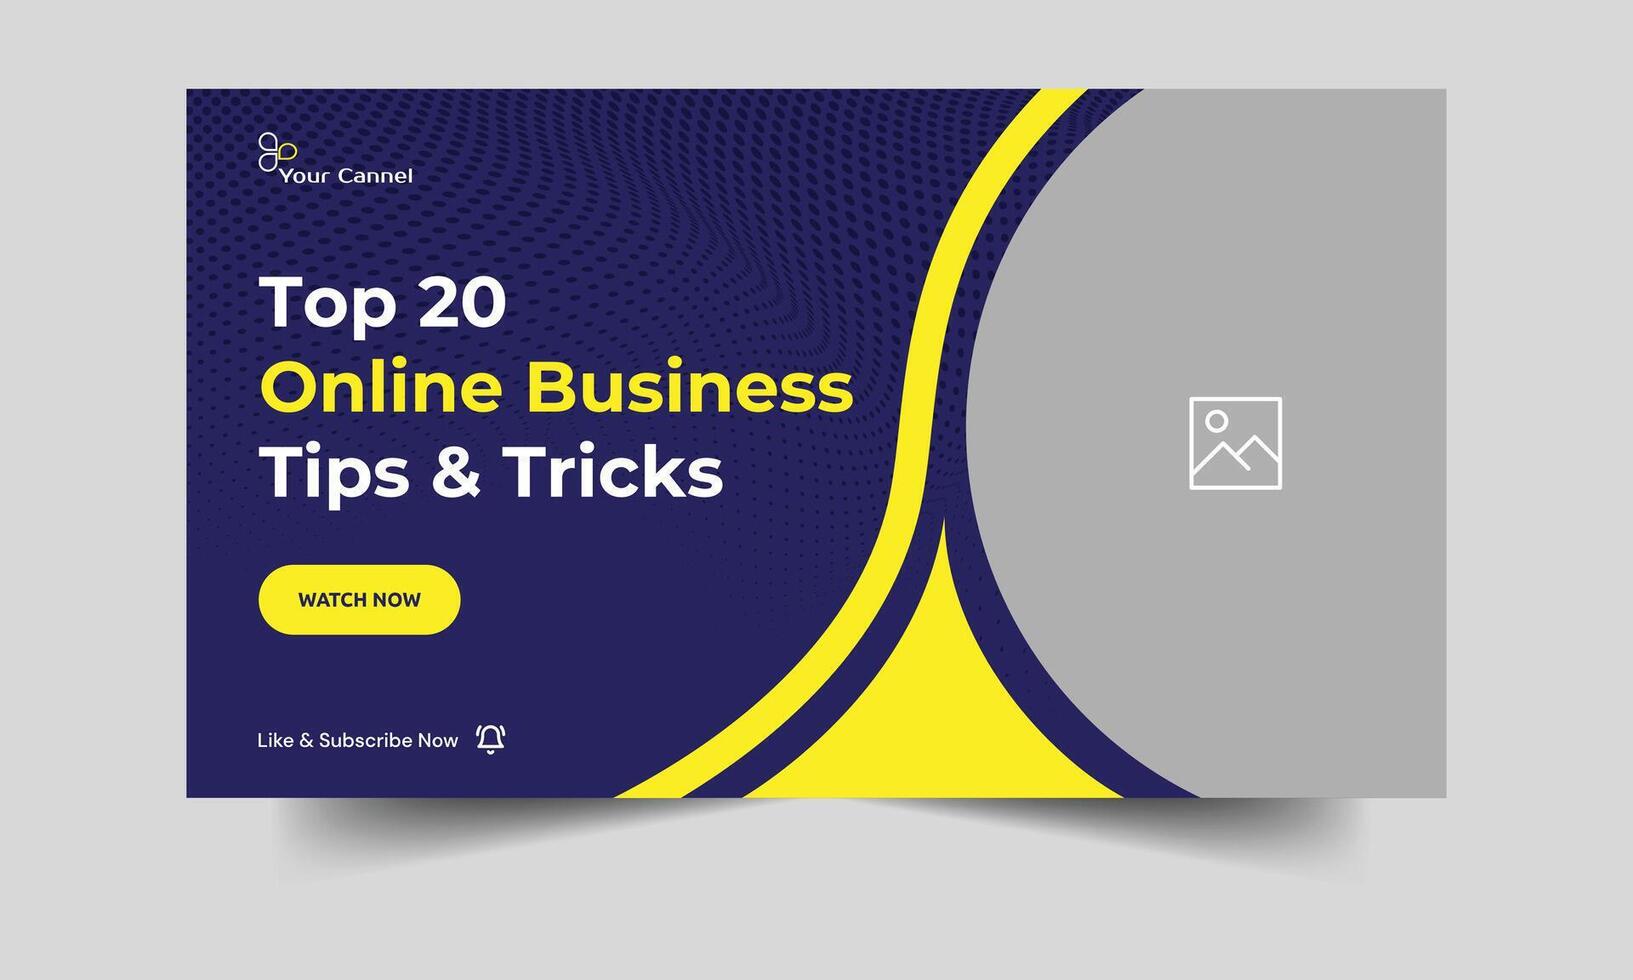 Trendy business tips and tricks video cover banner design, business idea techniques video thumbnail banner design, fully editable vector eps 10 file format